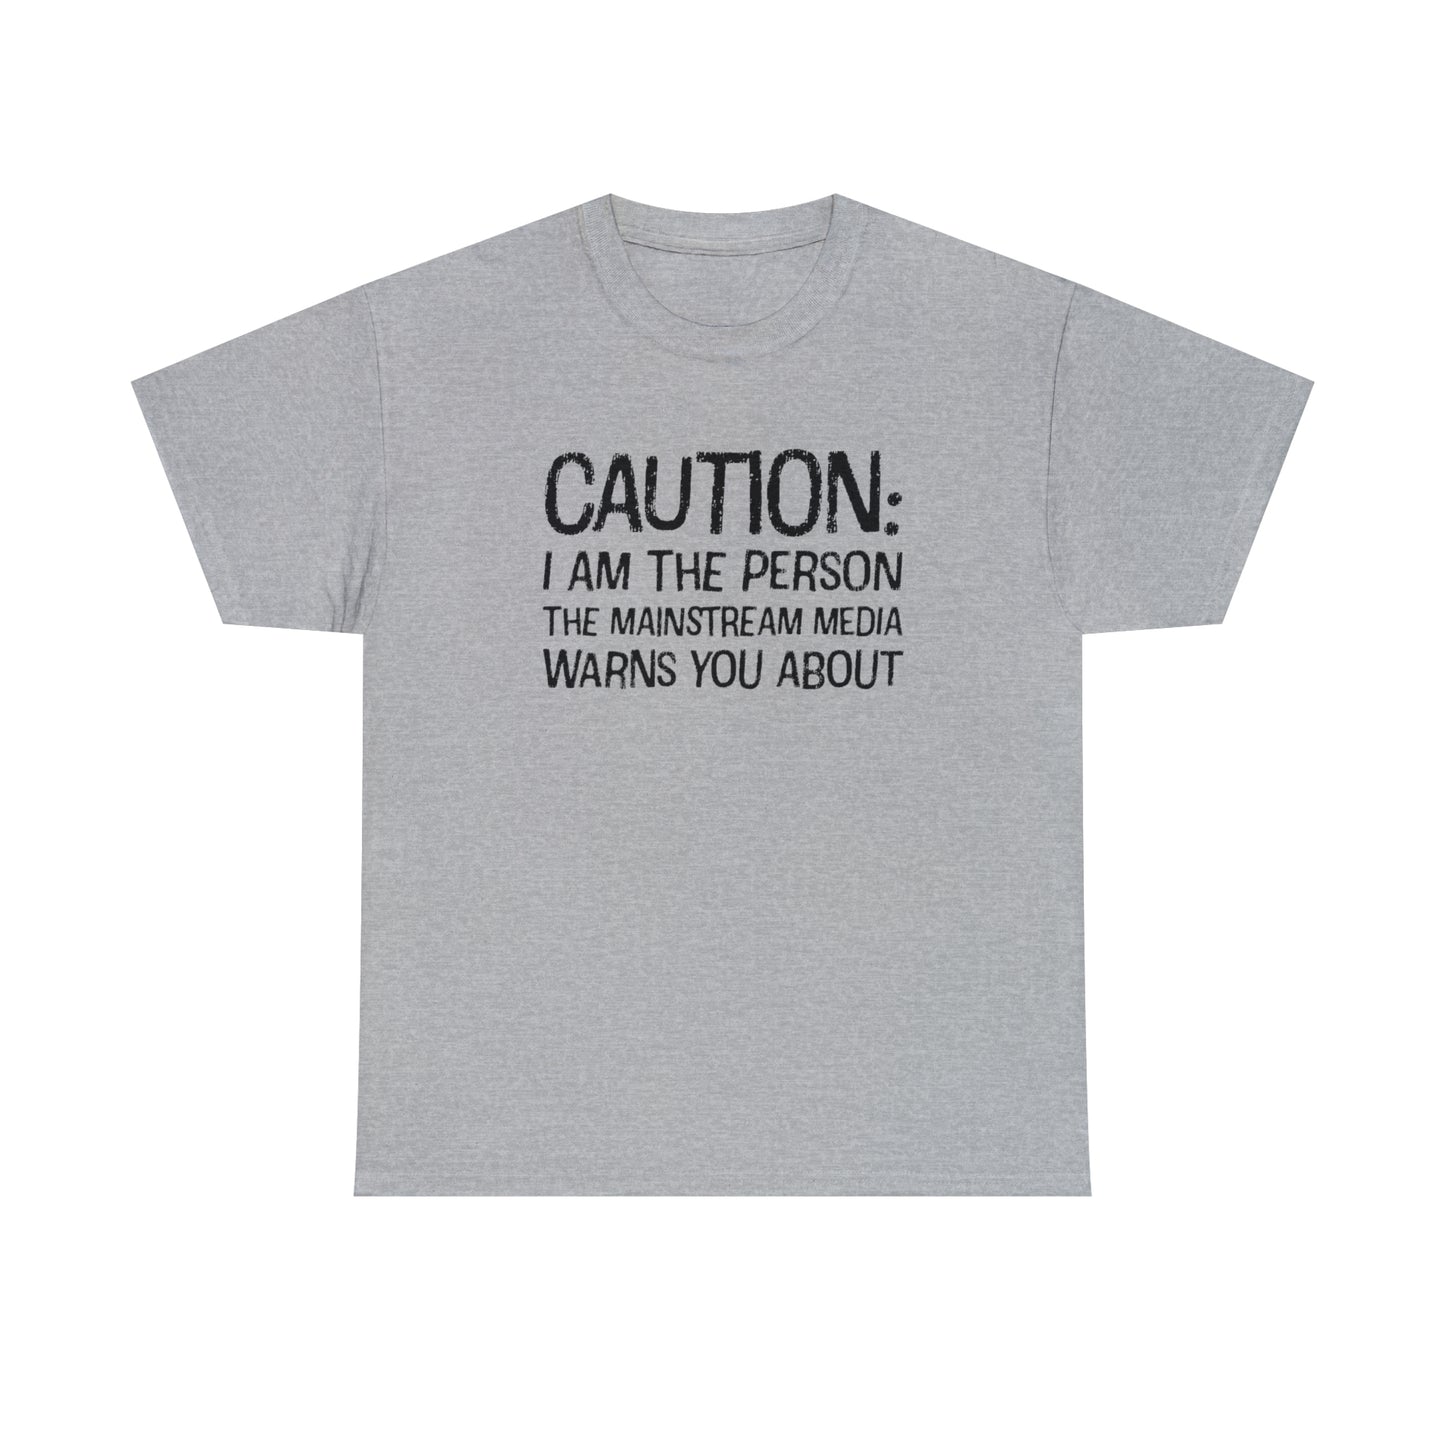 Caution T-Shirt For Warning TShirt For MSM T Shirt For Conservative Tee For Fake News Shirt For MAGA Gift